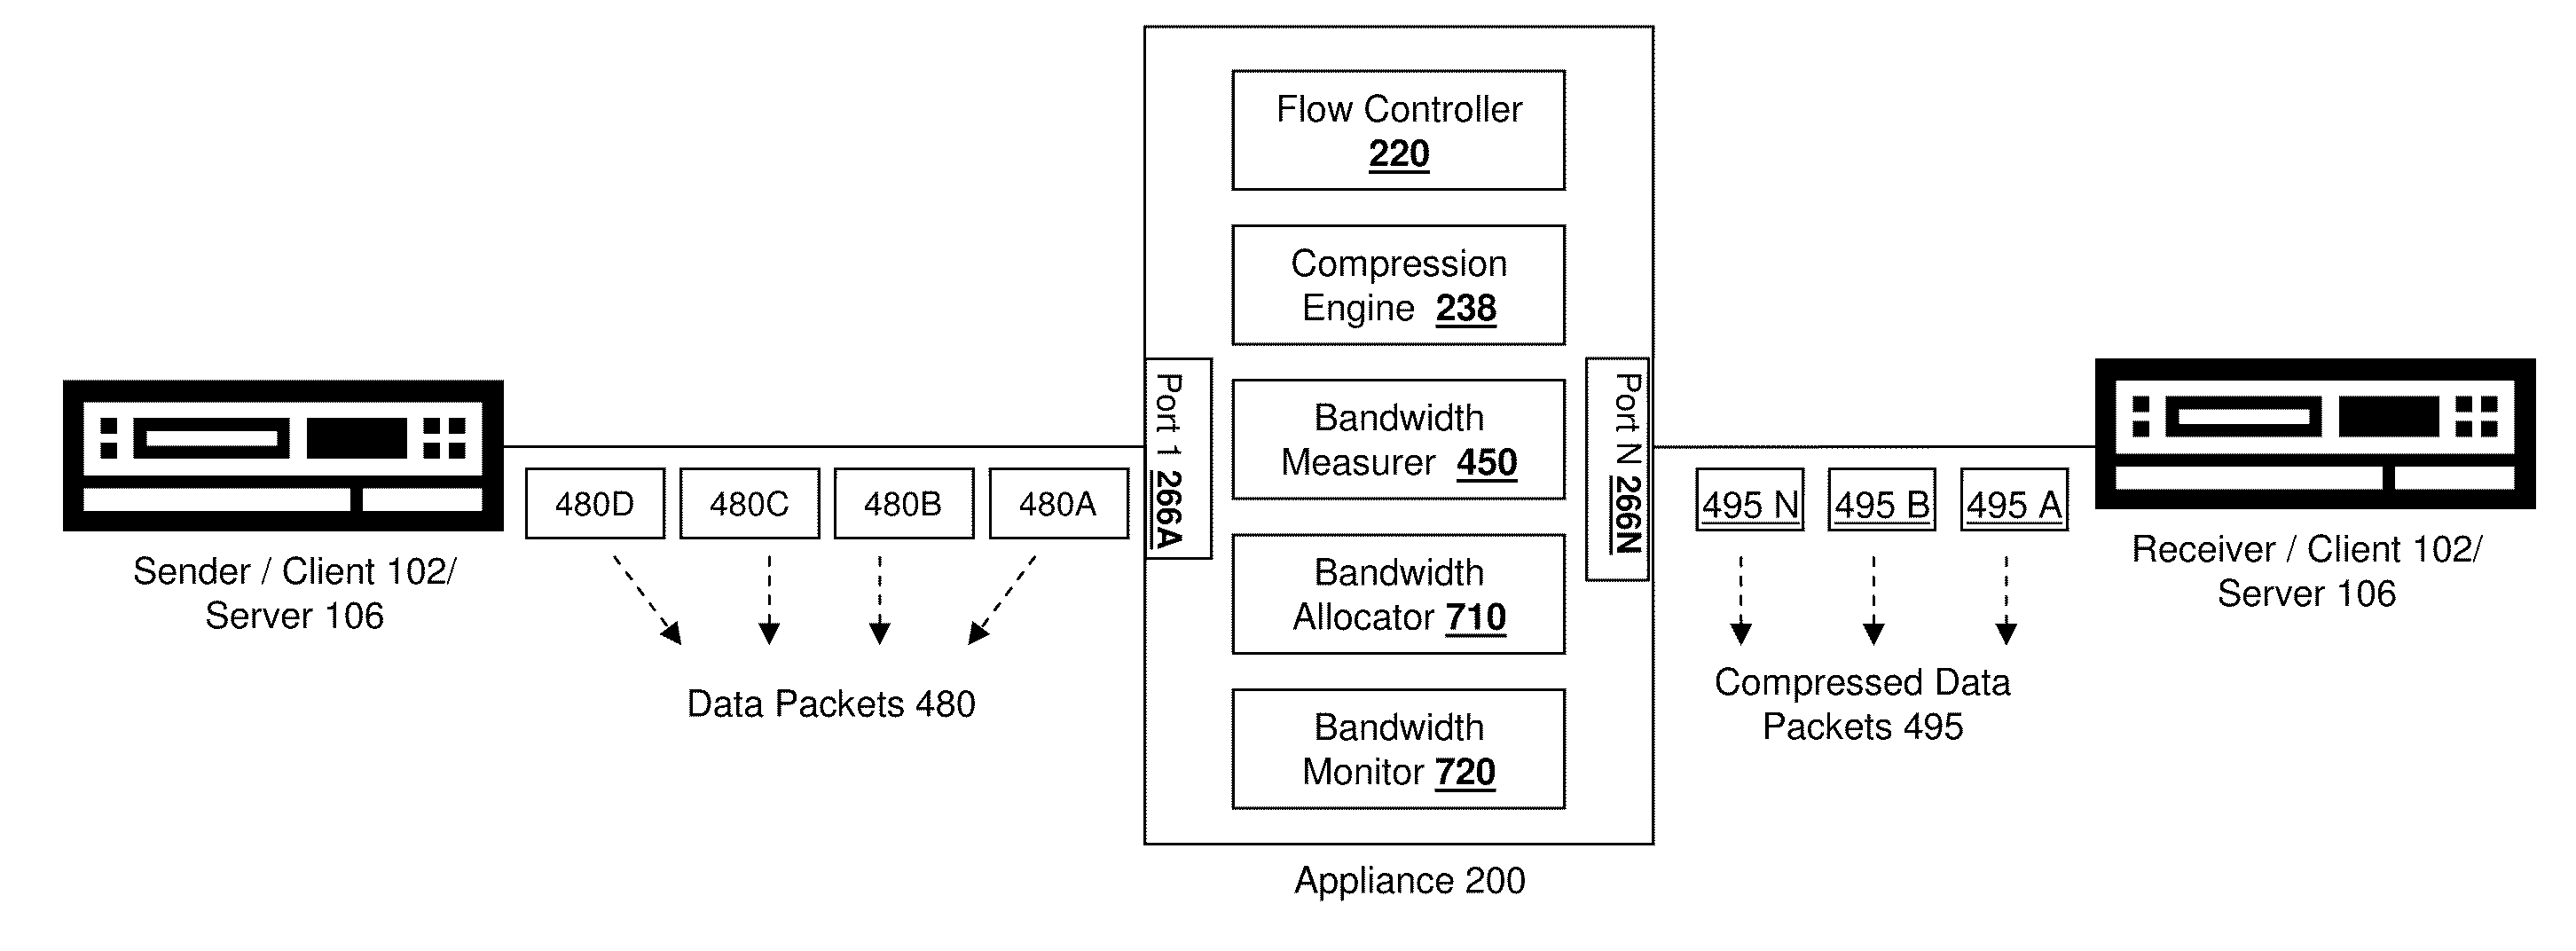 Systems and methods for allocating bandwidth by an intermediary for flow control